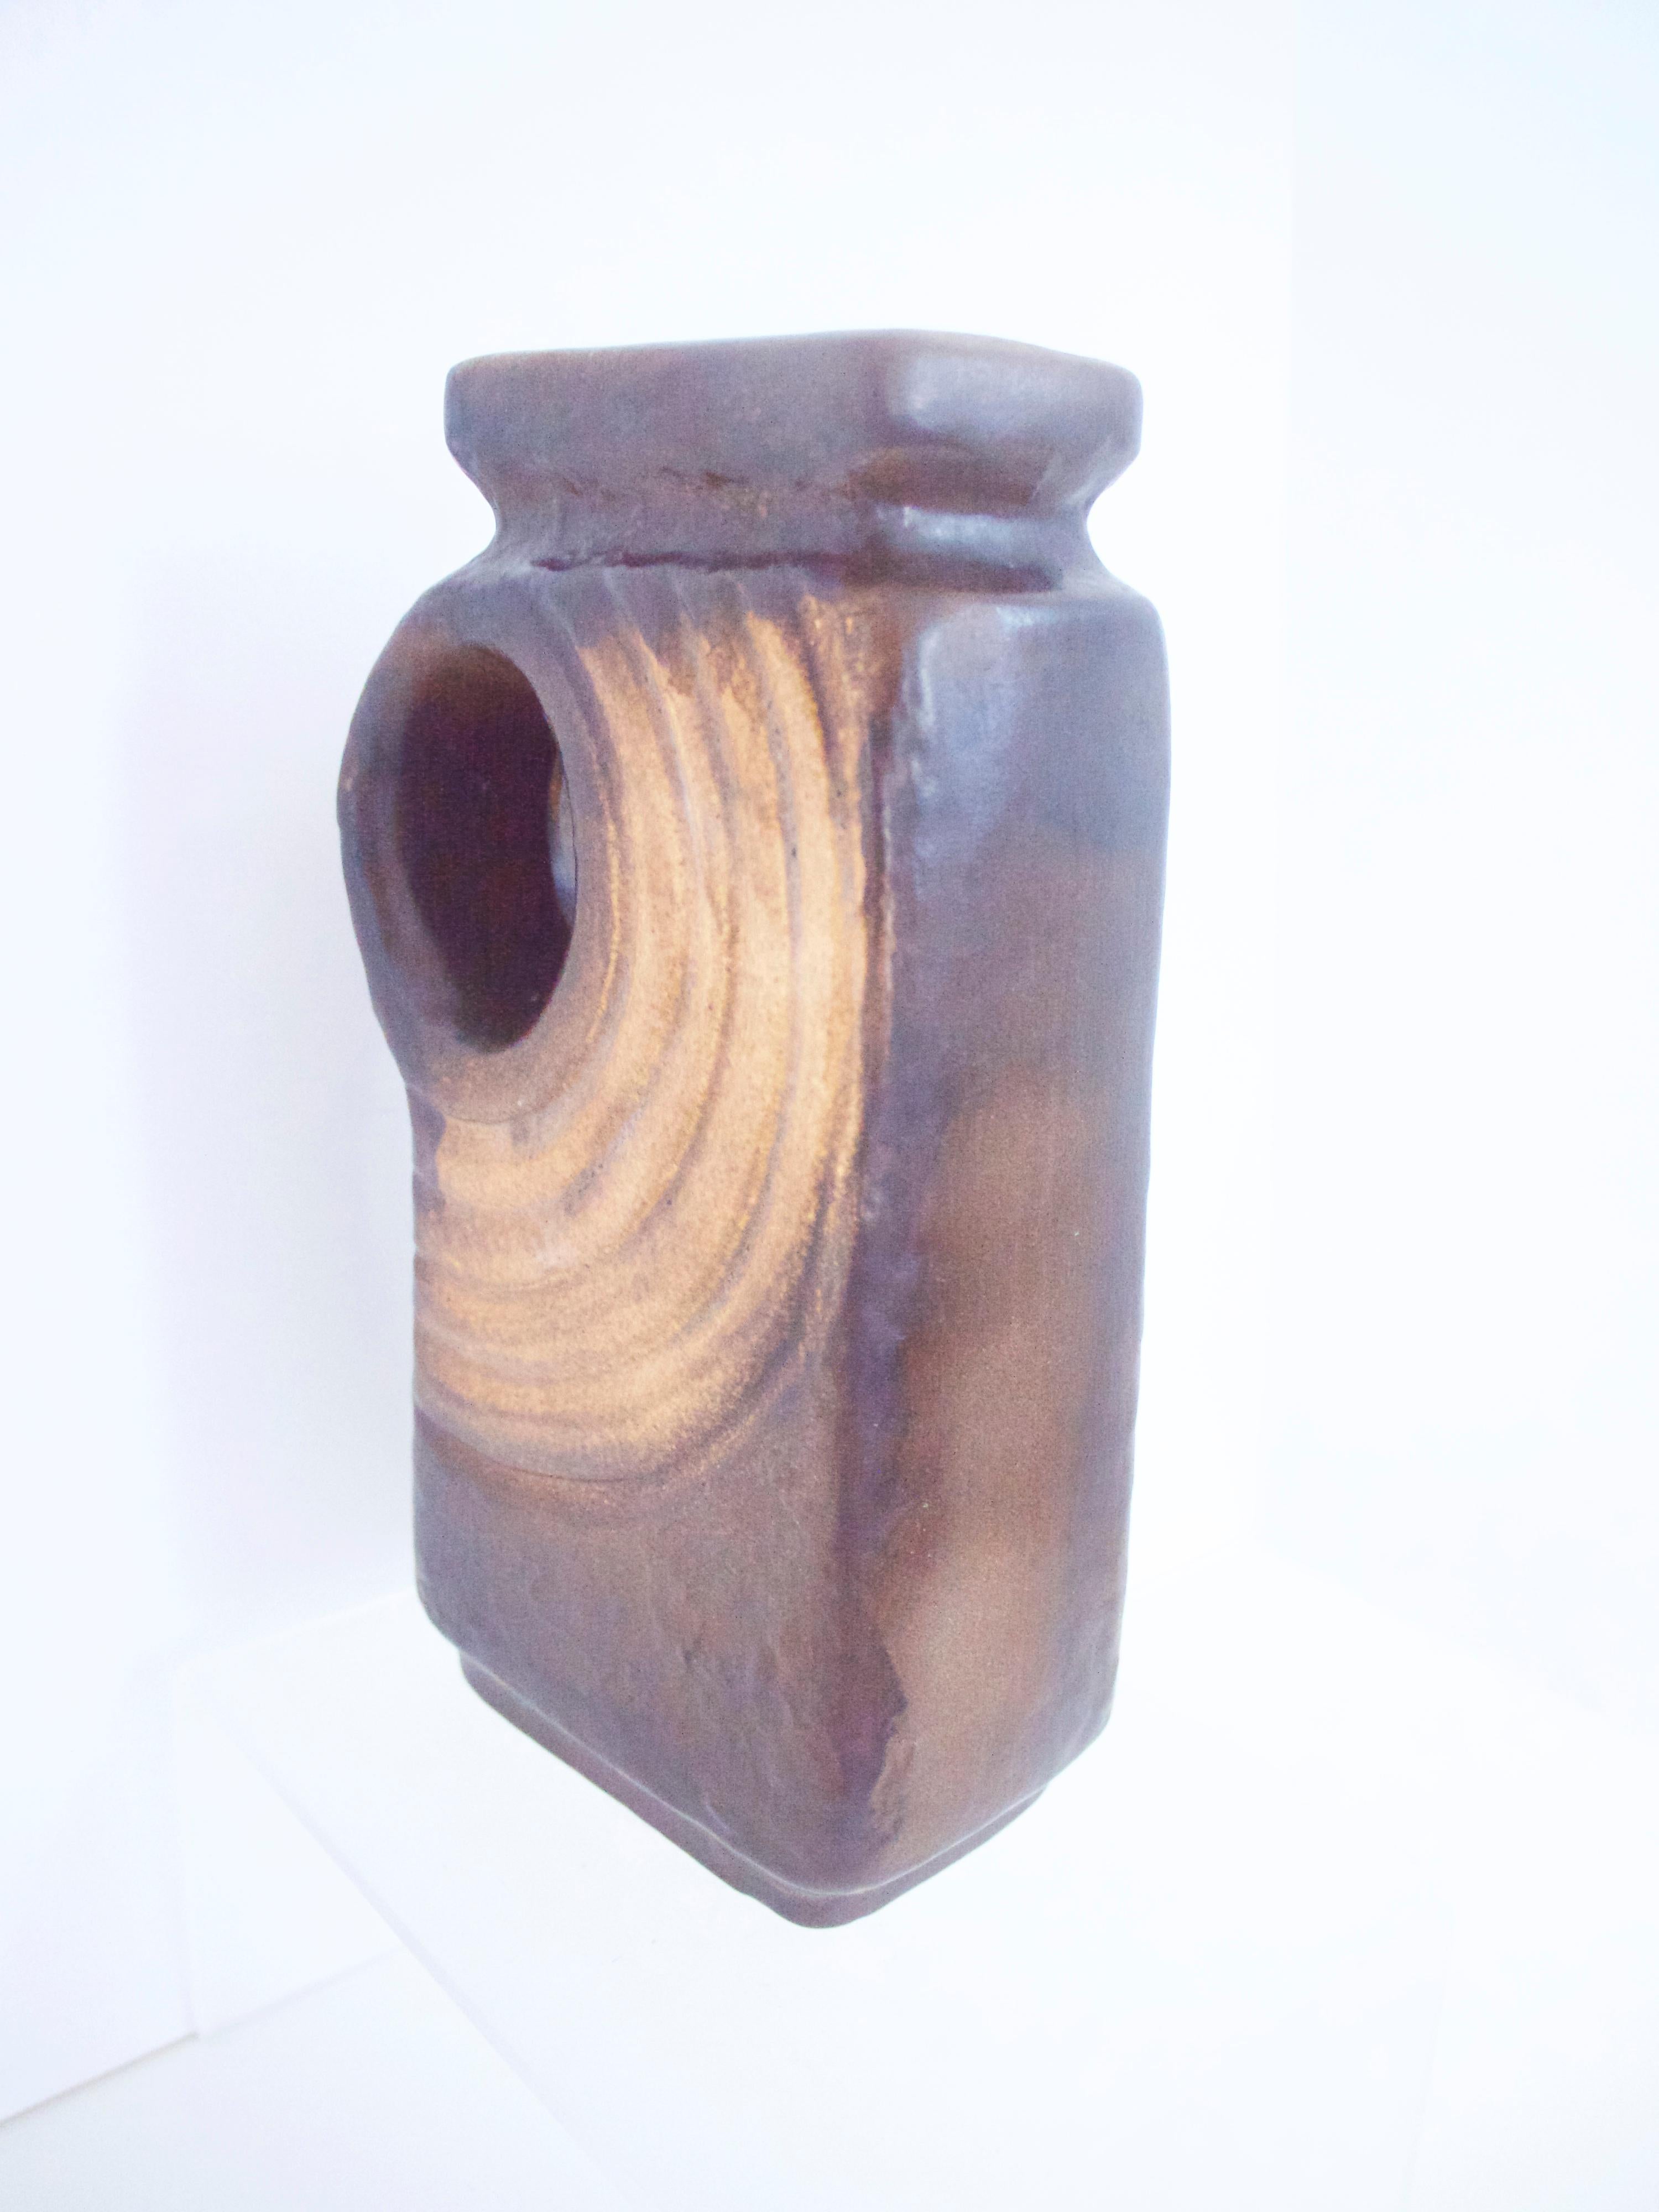 Brutalist Space Age Ceramic Chimney Vases Walter Becht Late 1960s Germany, Pair For Sale 2